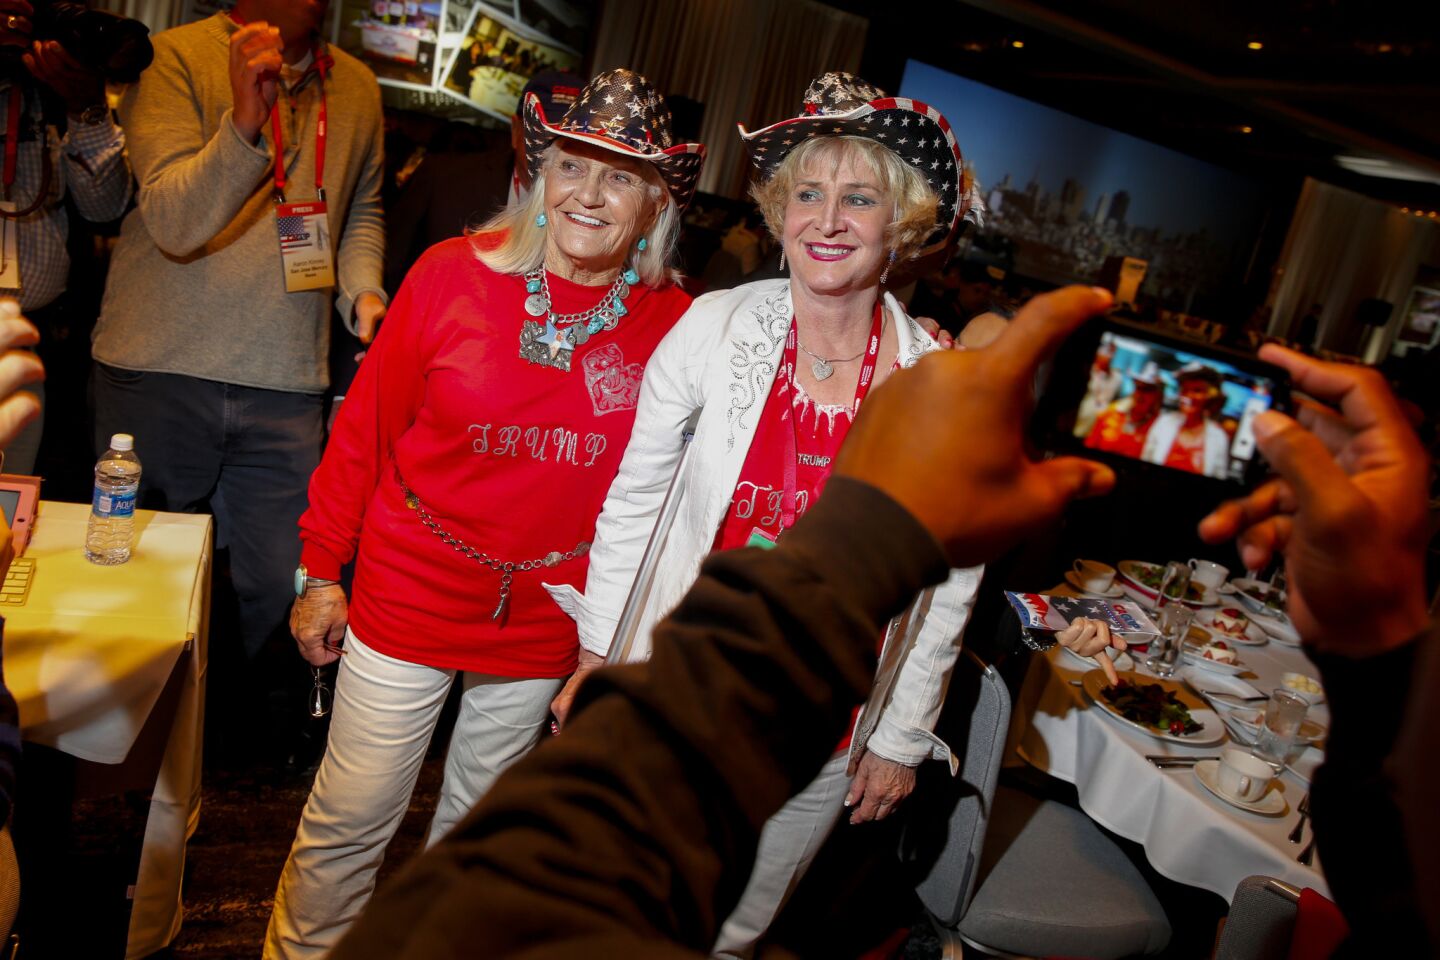 Cheryl Ann McDonald, left and Carolyn Mary Gibbs, both from Discovery Bay, stop for a photo at the start of the California Republican Convention.